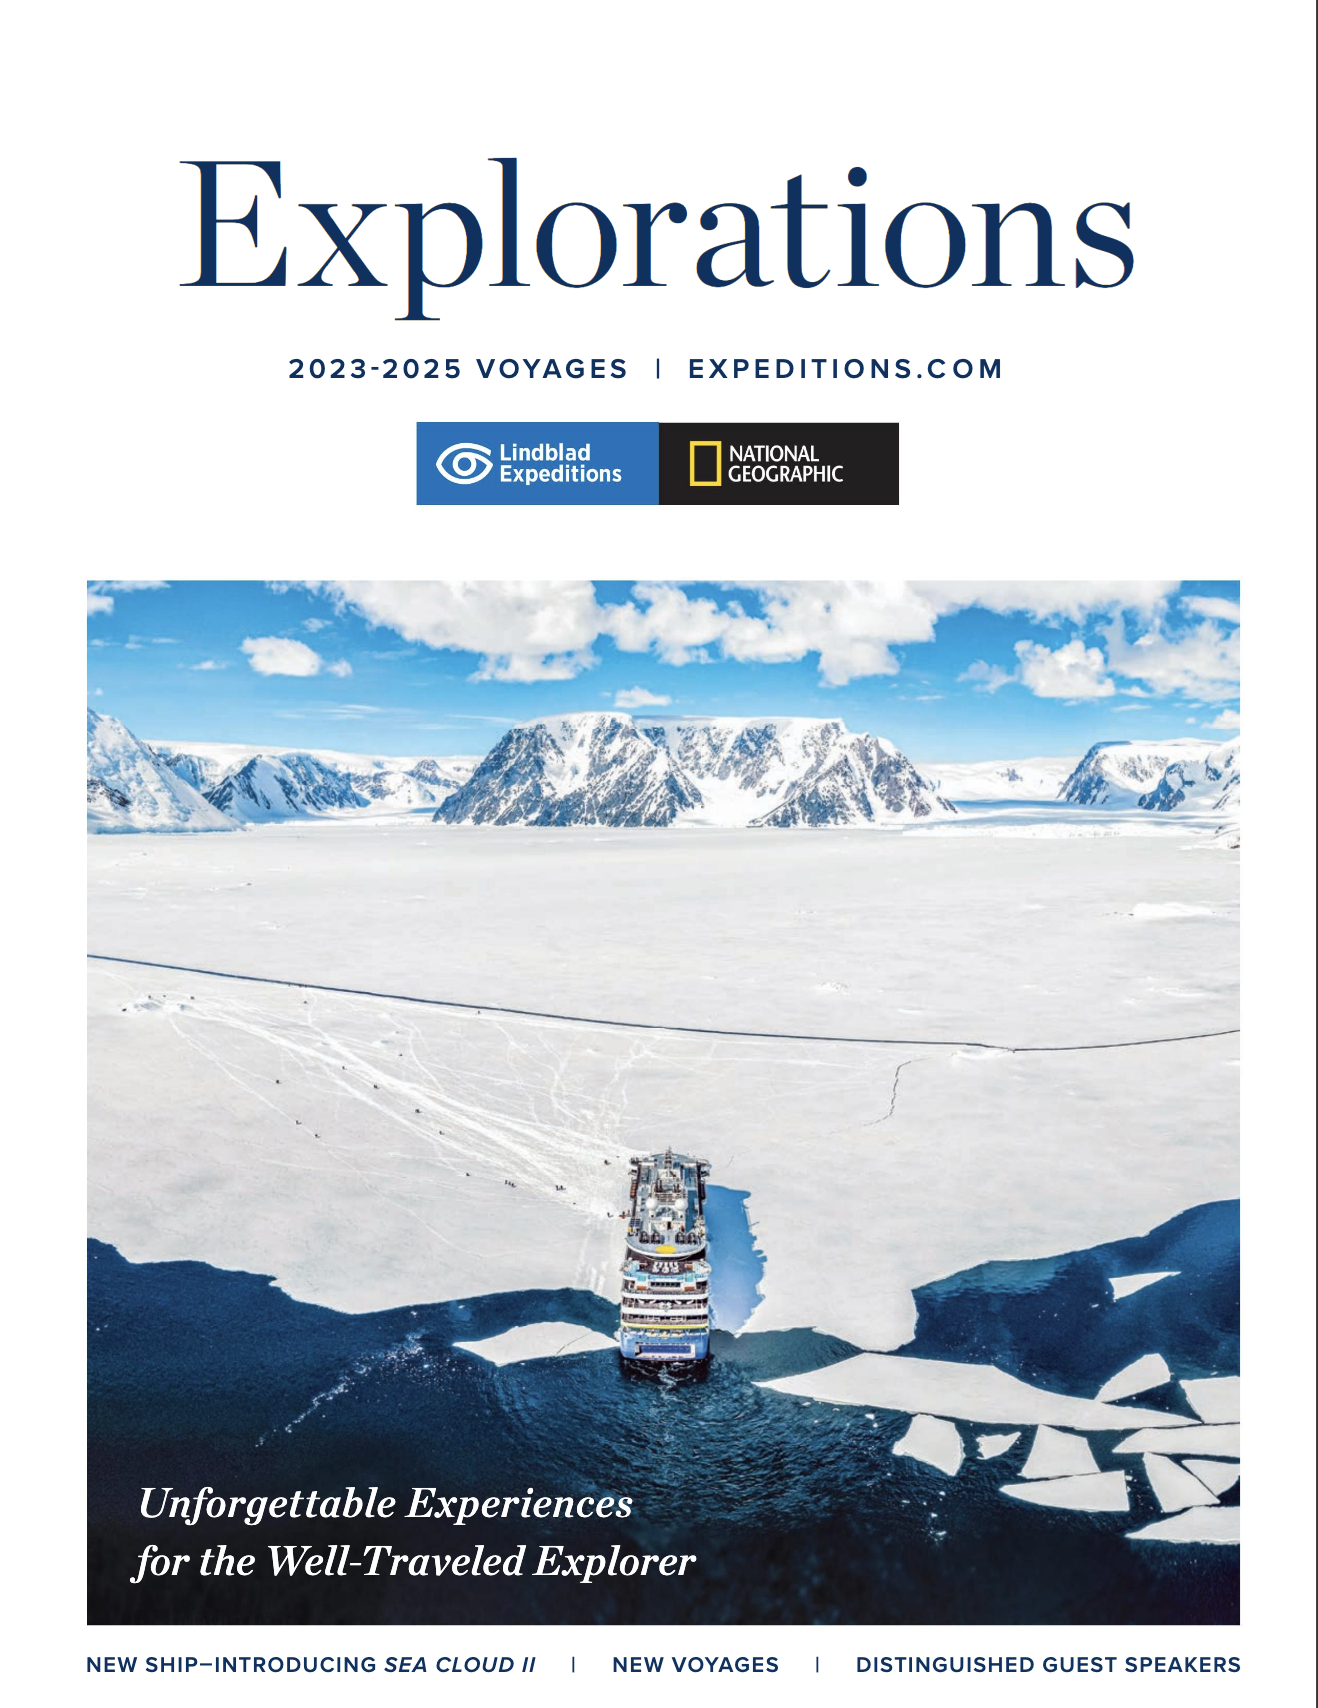 Order or download your free Explorations brochure